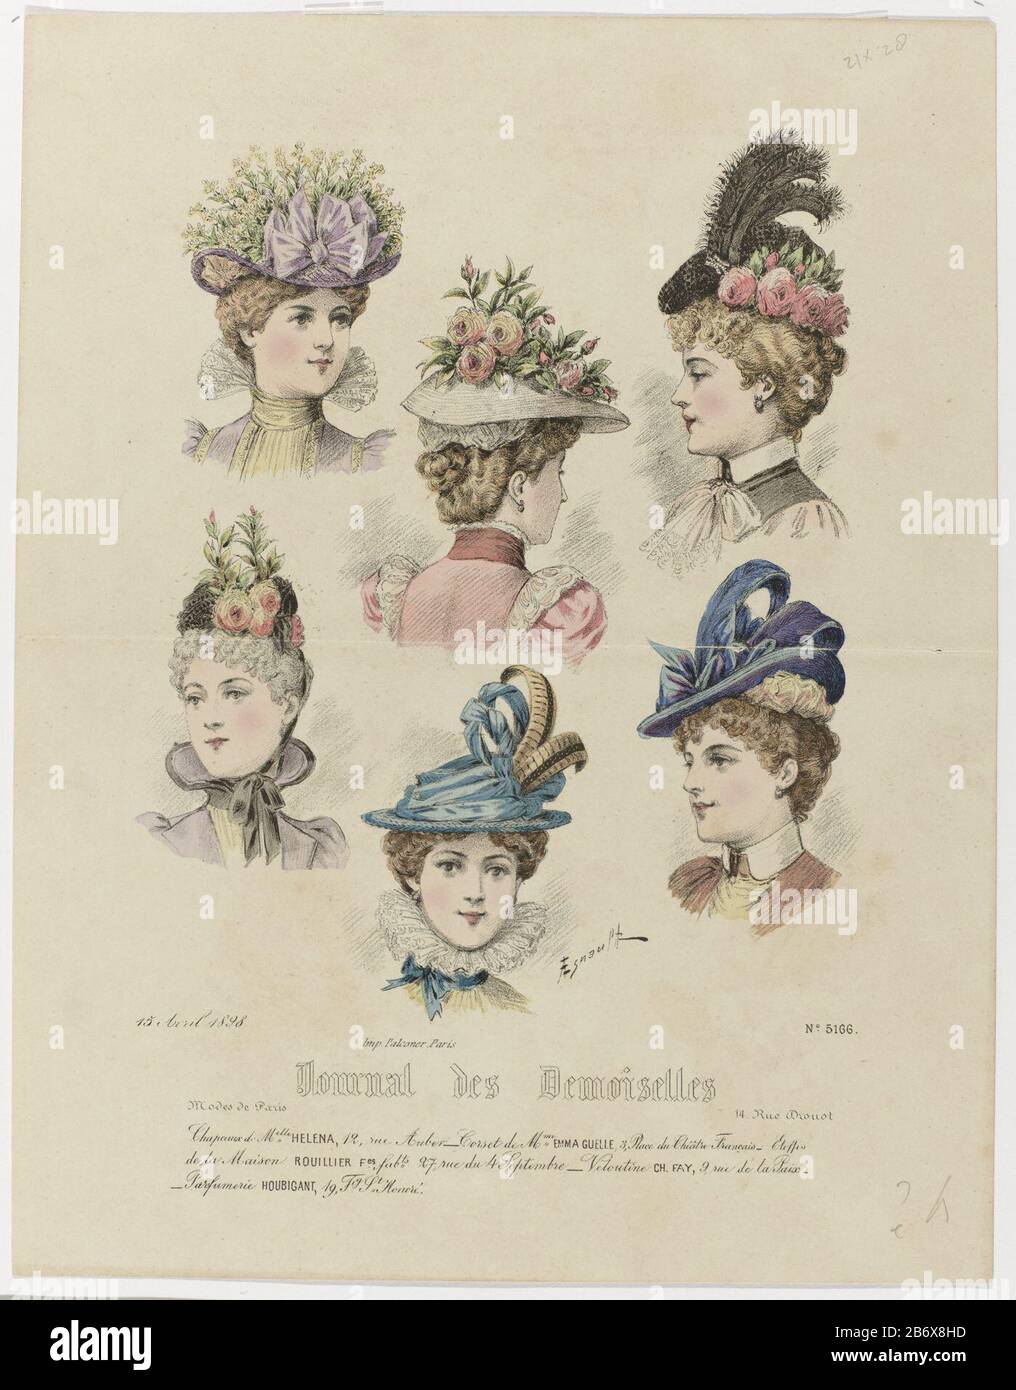 Journal des Demoiselles, 15 Avril 1898, No 5166 Chapeaux de Melle Helen Six  female heads with different hats. According to the caption, hats Helena.  Here are some rules text advertising for various